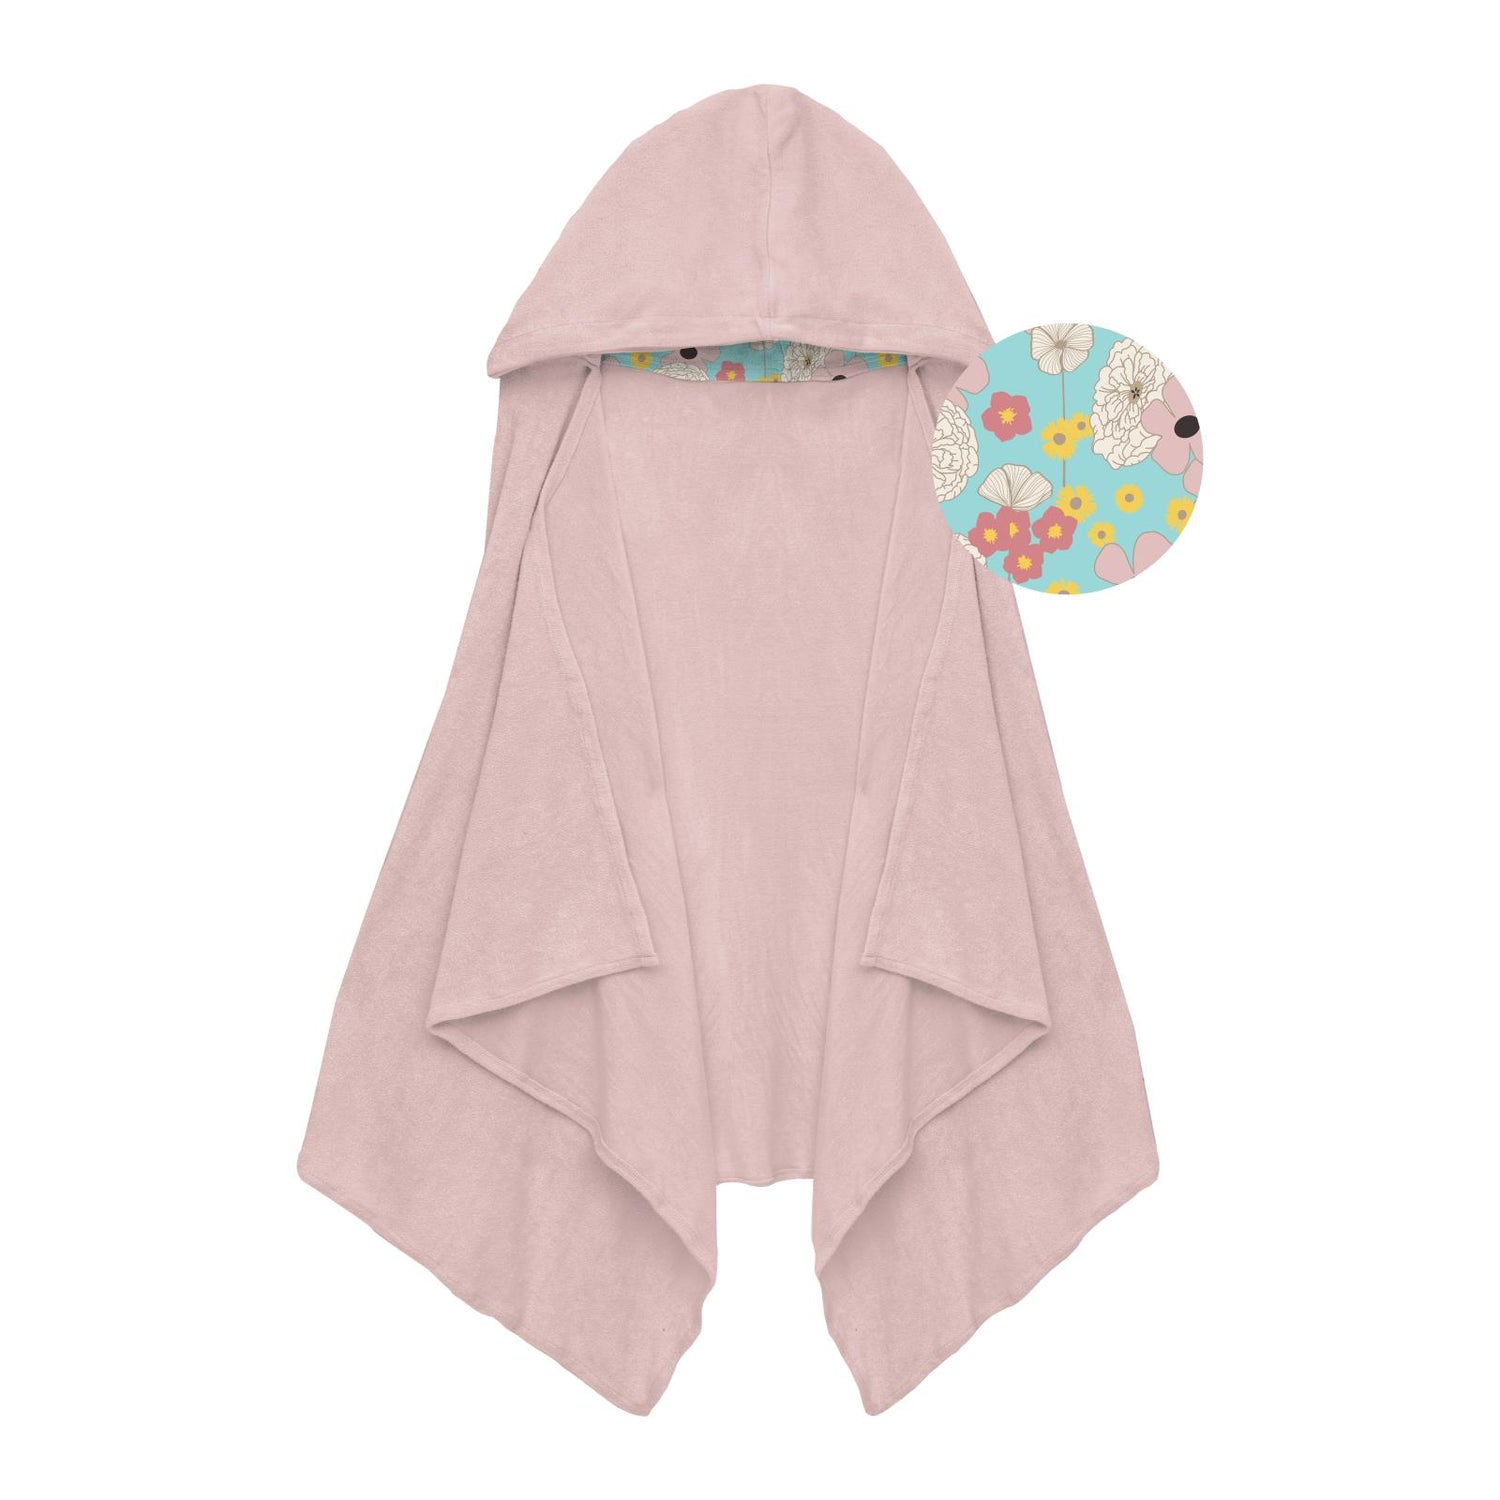 Terry Hooded Towel with Print Lined Hood in Baby Rose with Summer Sky Flower Power